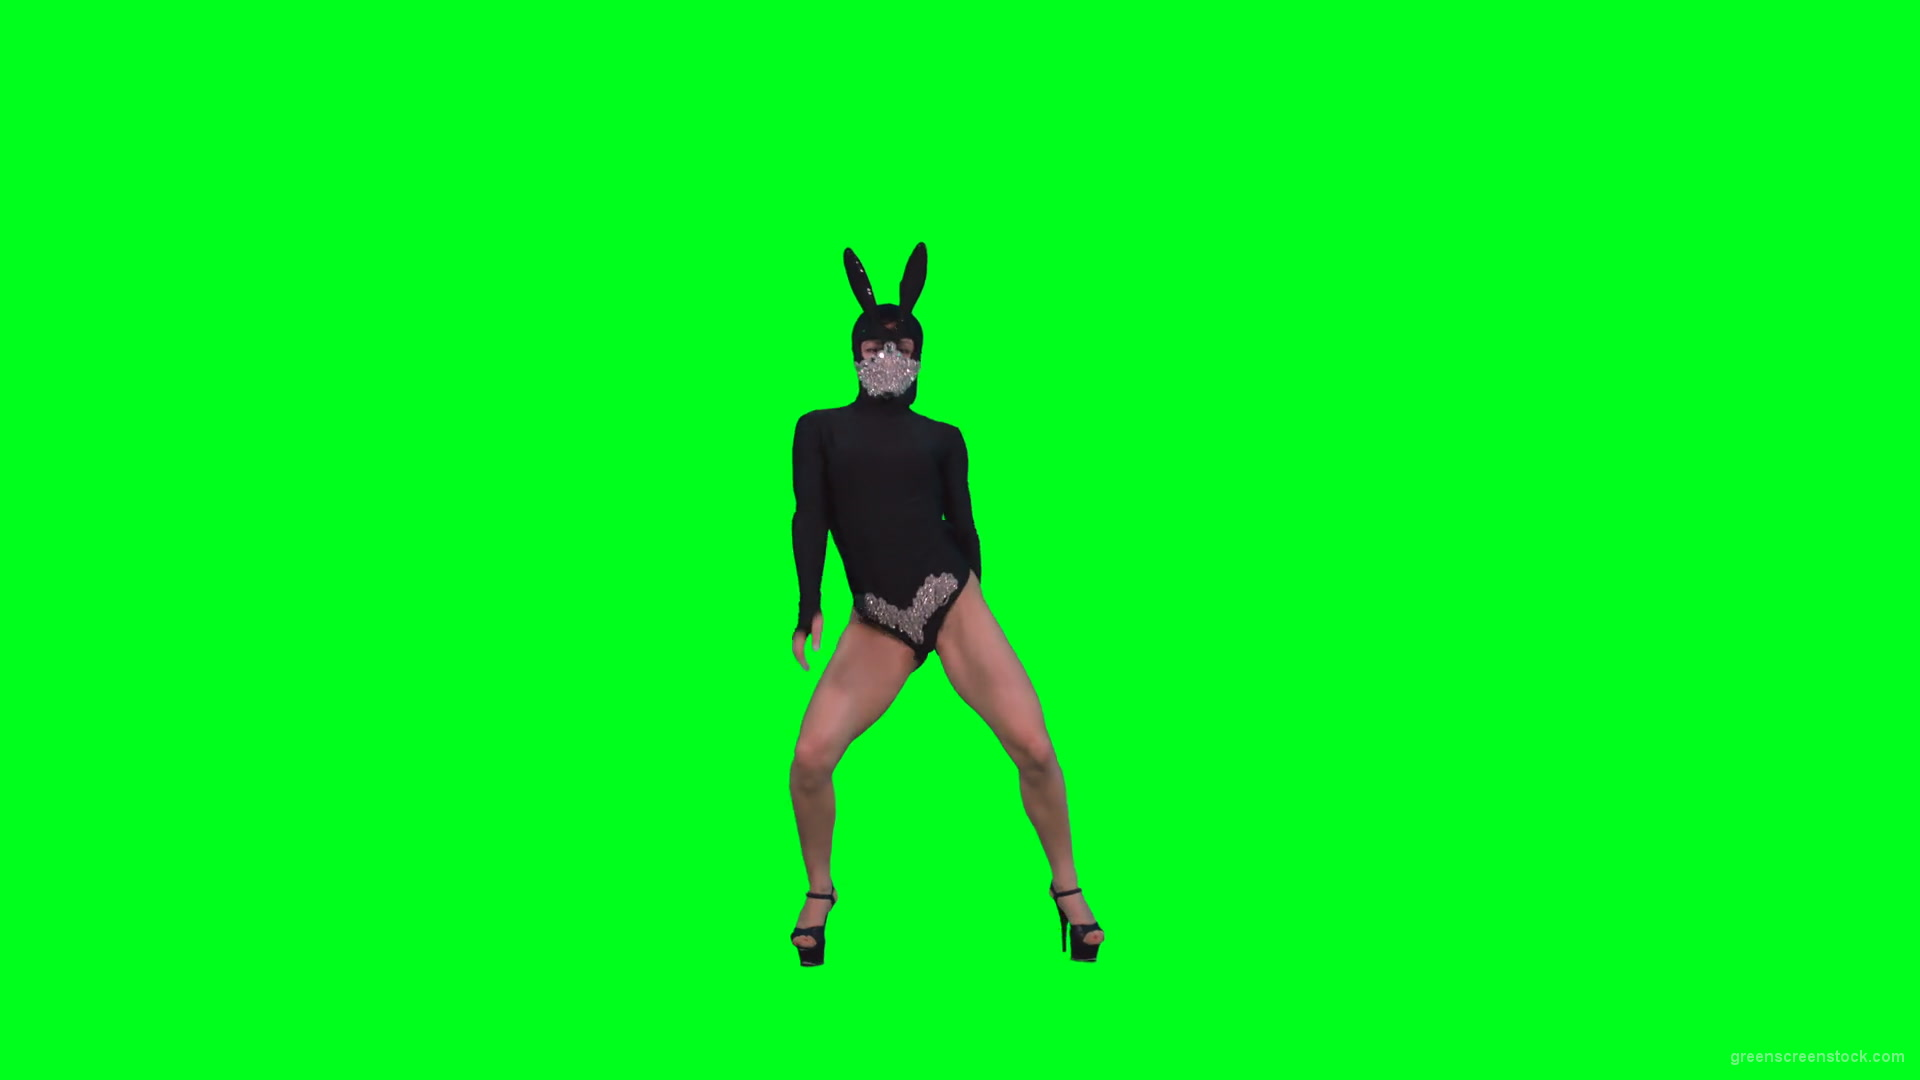 Sexy-dancing-girl-in-rabbit-mask-and-black-fashion-dress-posing-in-fetish-style-isolated-on-green-screen-4K-Video-Footage-1920_007 Green Screen Stock